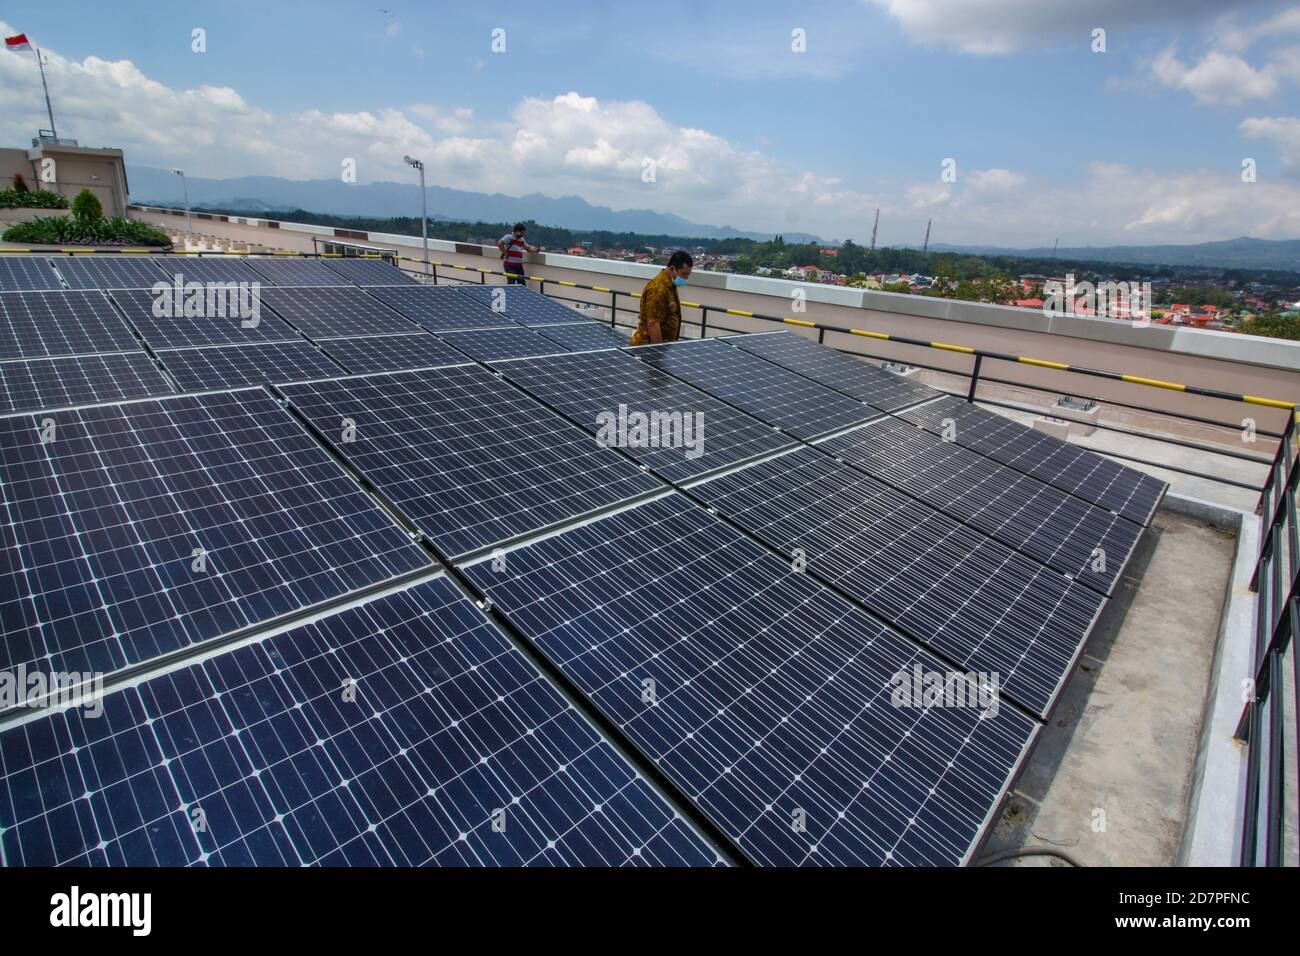 Solar panels or solar cell absorb sunlight at Bukittinggi City, West Sumatra Province, Indonesia to generate electricity Stock Photo